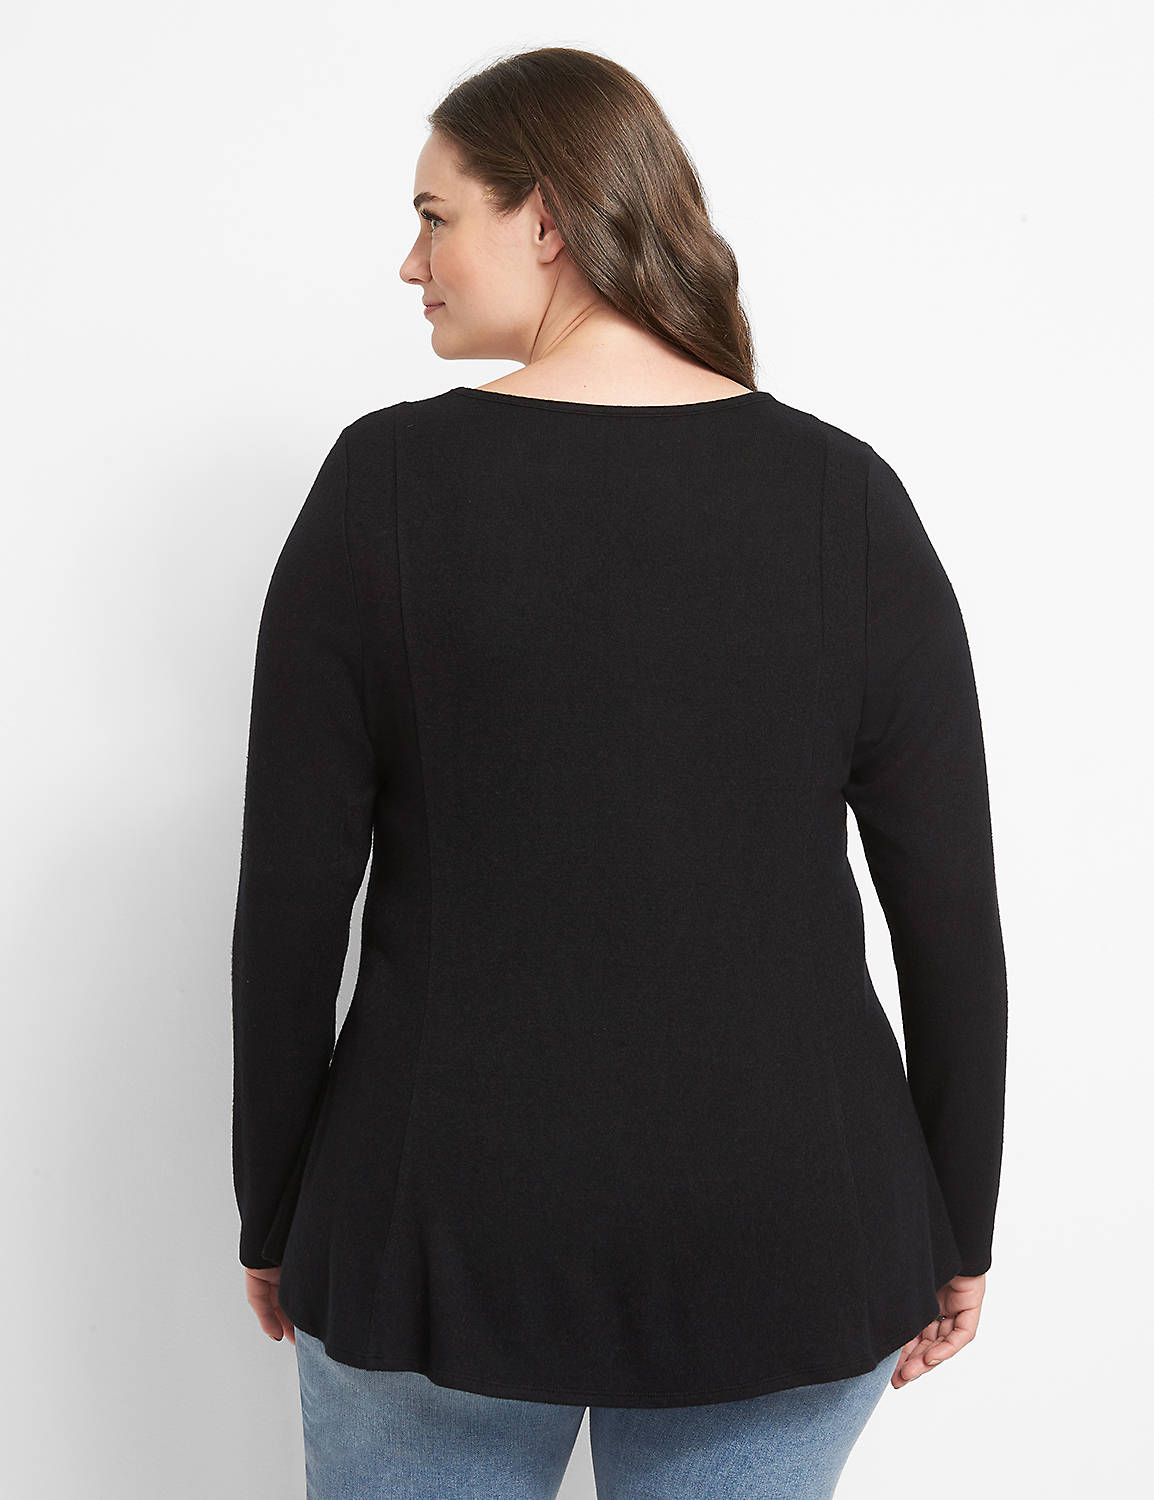 Long Sleeve Scoop Neck Fit and Flare Hacci Top Solid 1123730:Ascena Black:30/32 Product Image 2